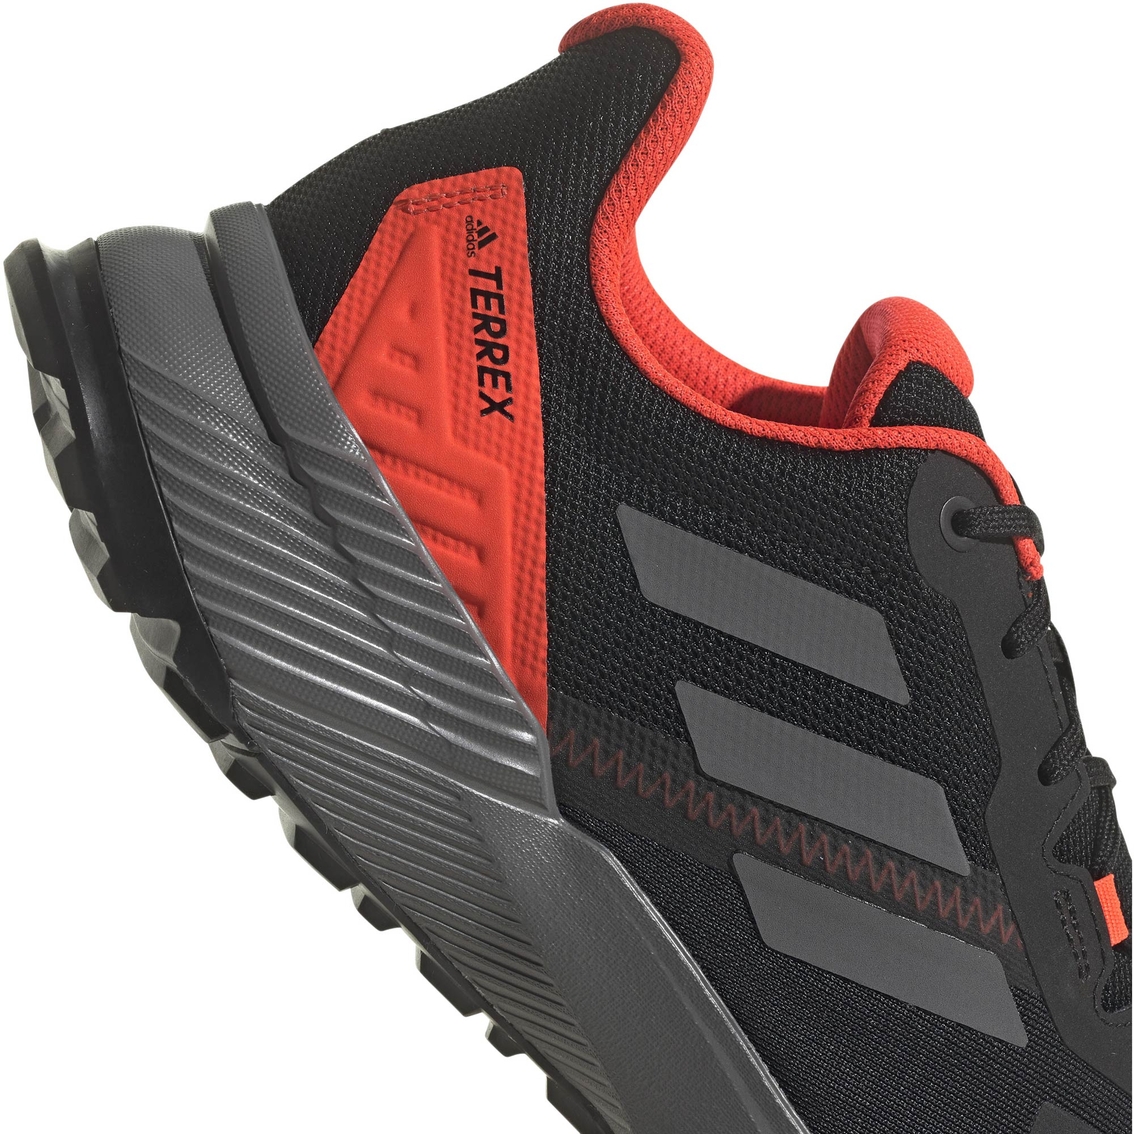 Adidas Terrex Soulstride Trail Running Shoes - Image 7 of 8